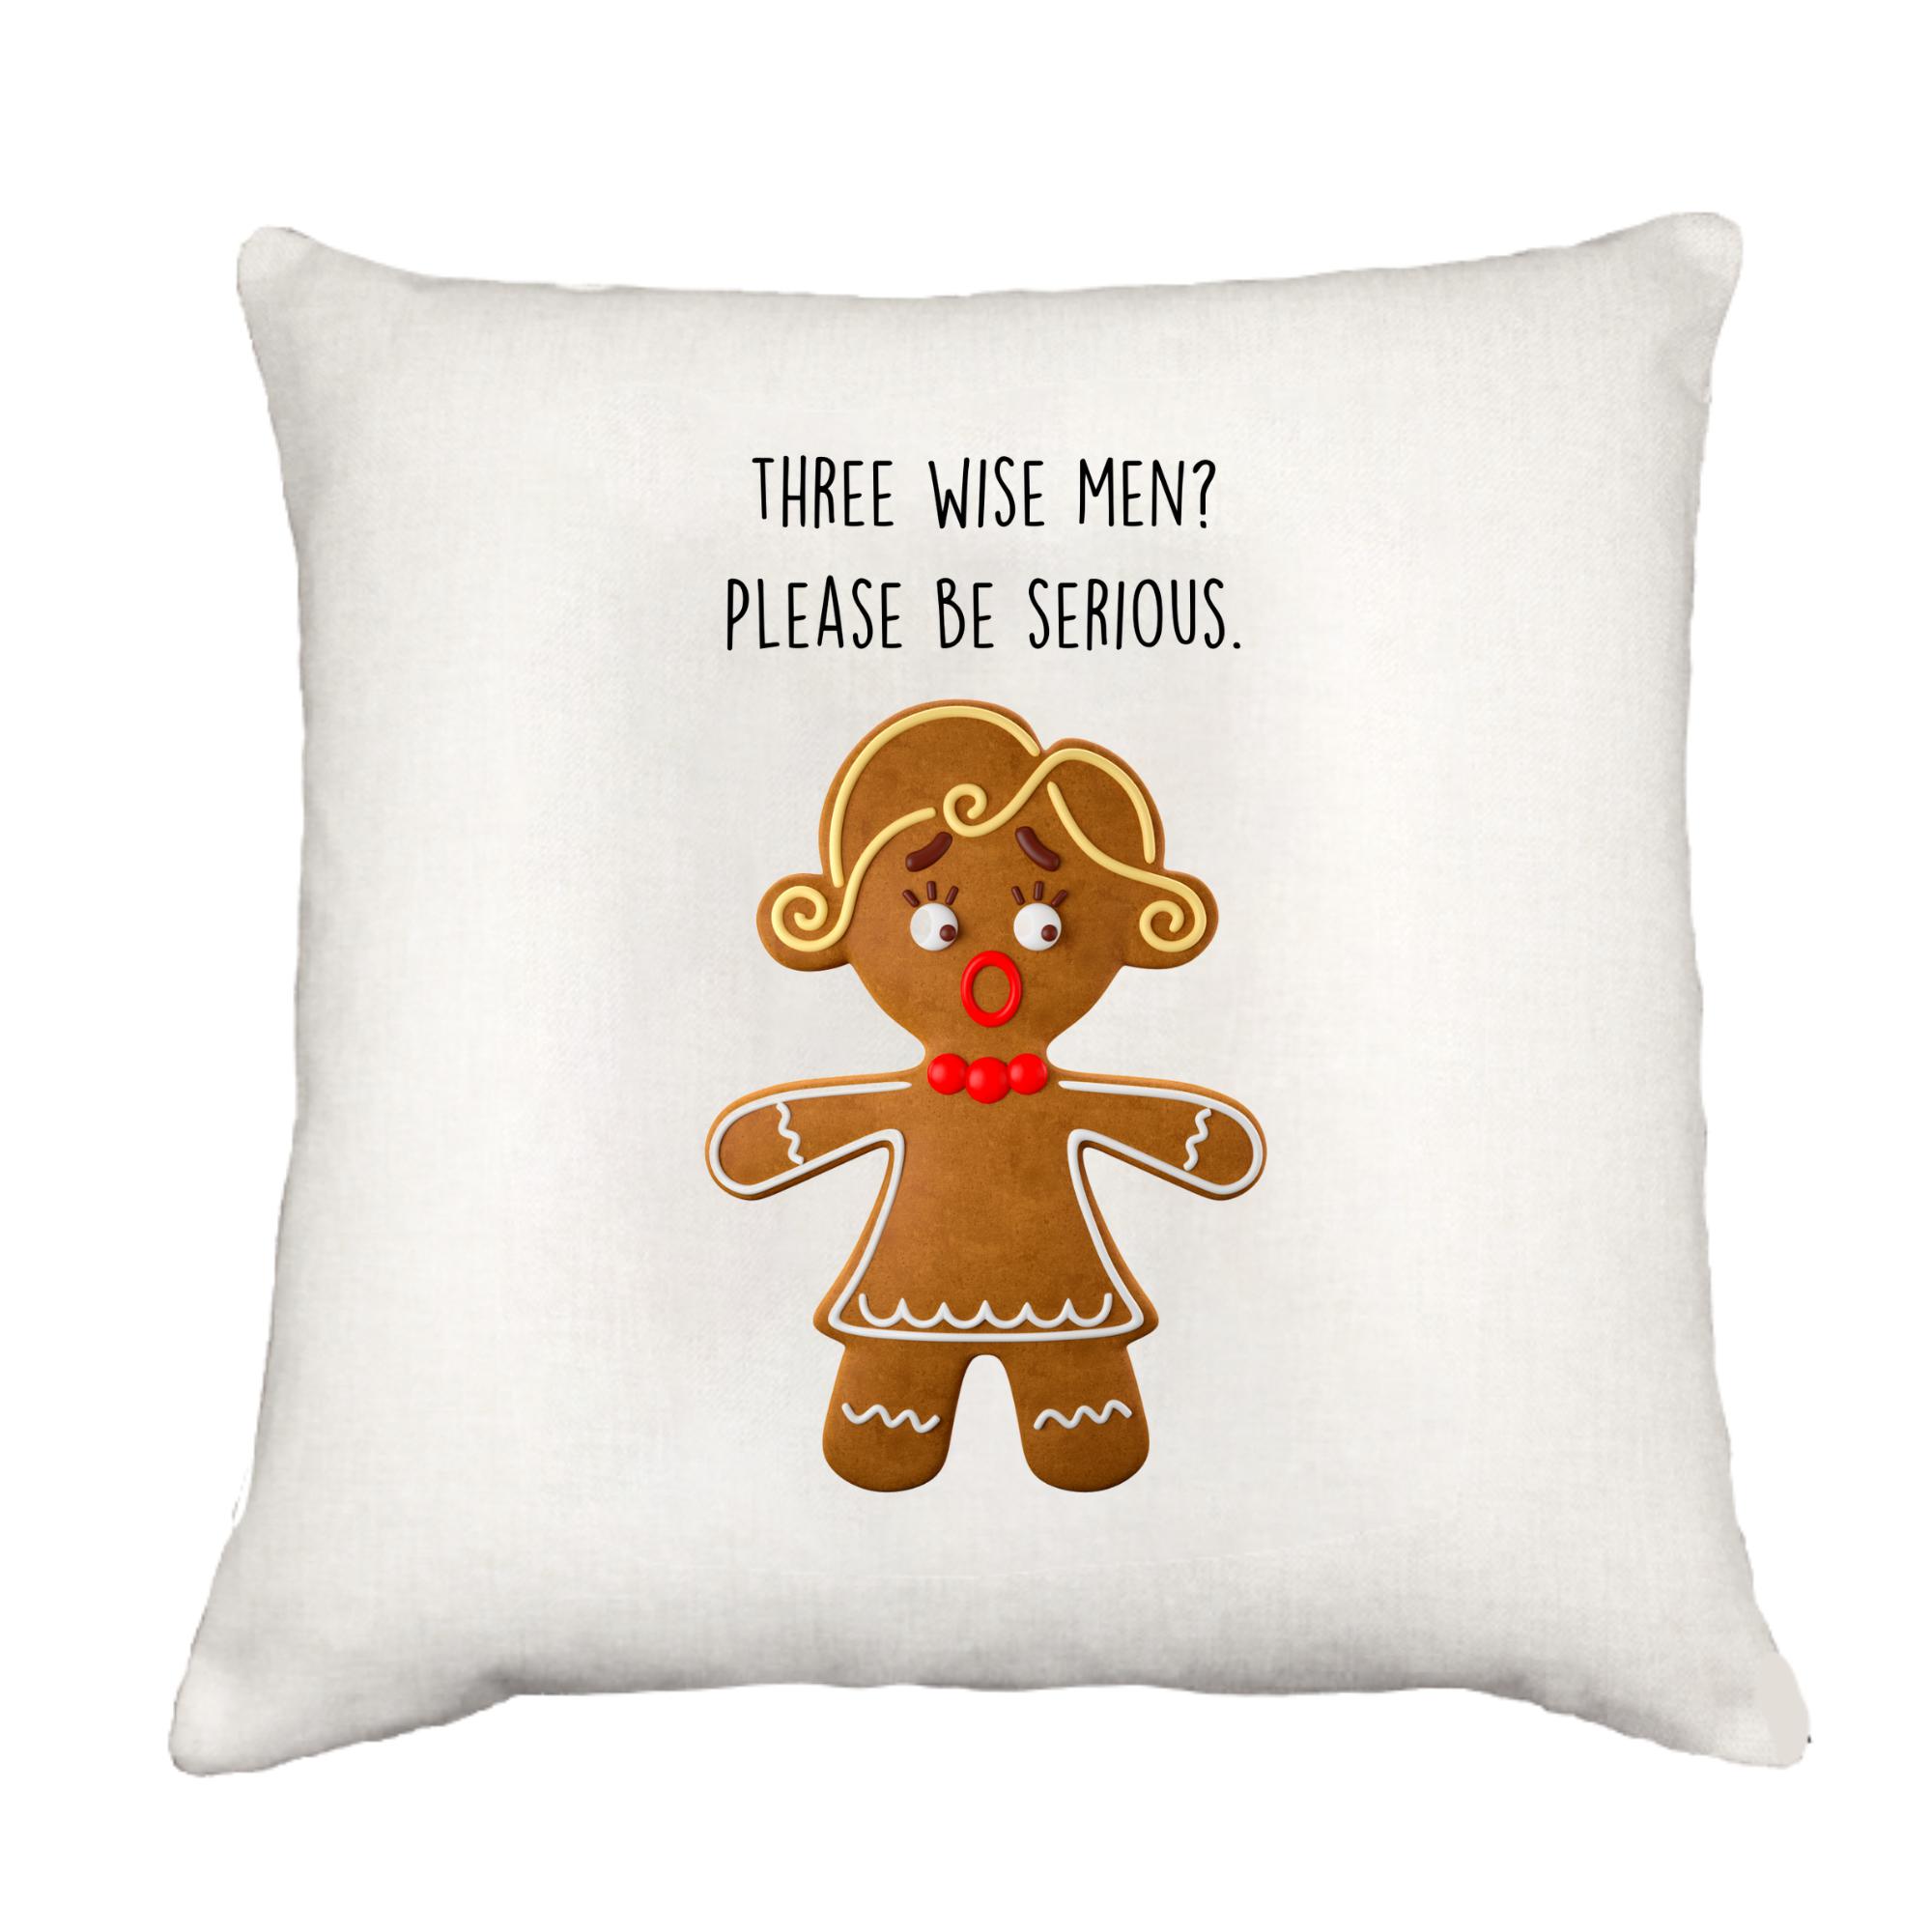 Three Wise Men Cottage Pillow Throw/Decorative Pillow - Southern Sisters